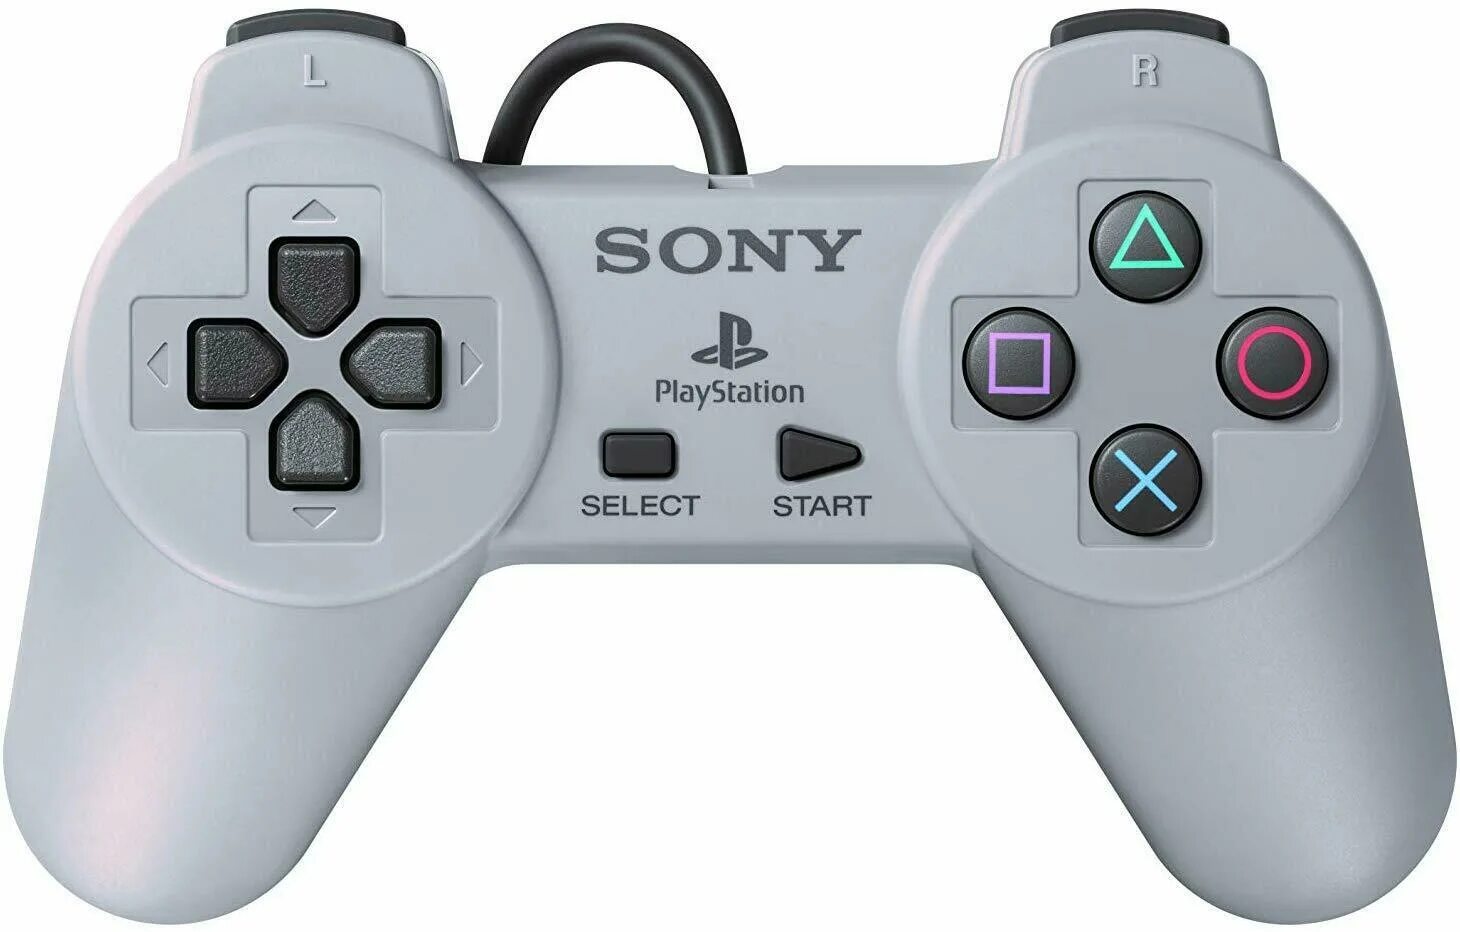 Sony ps1 Classic. PLAYSTATION 1 Controller. Ps1 Classic Mini. Dualshock ps1. Control 01